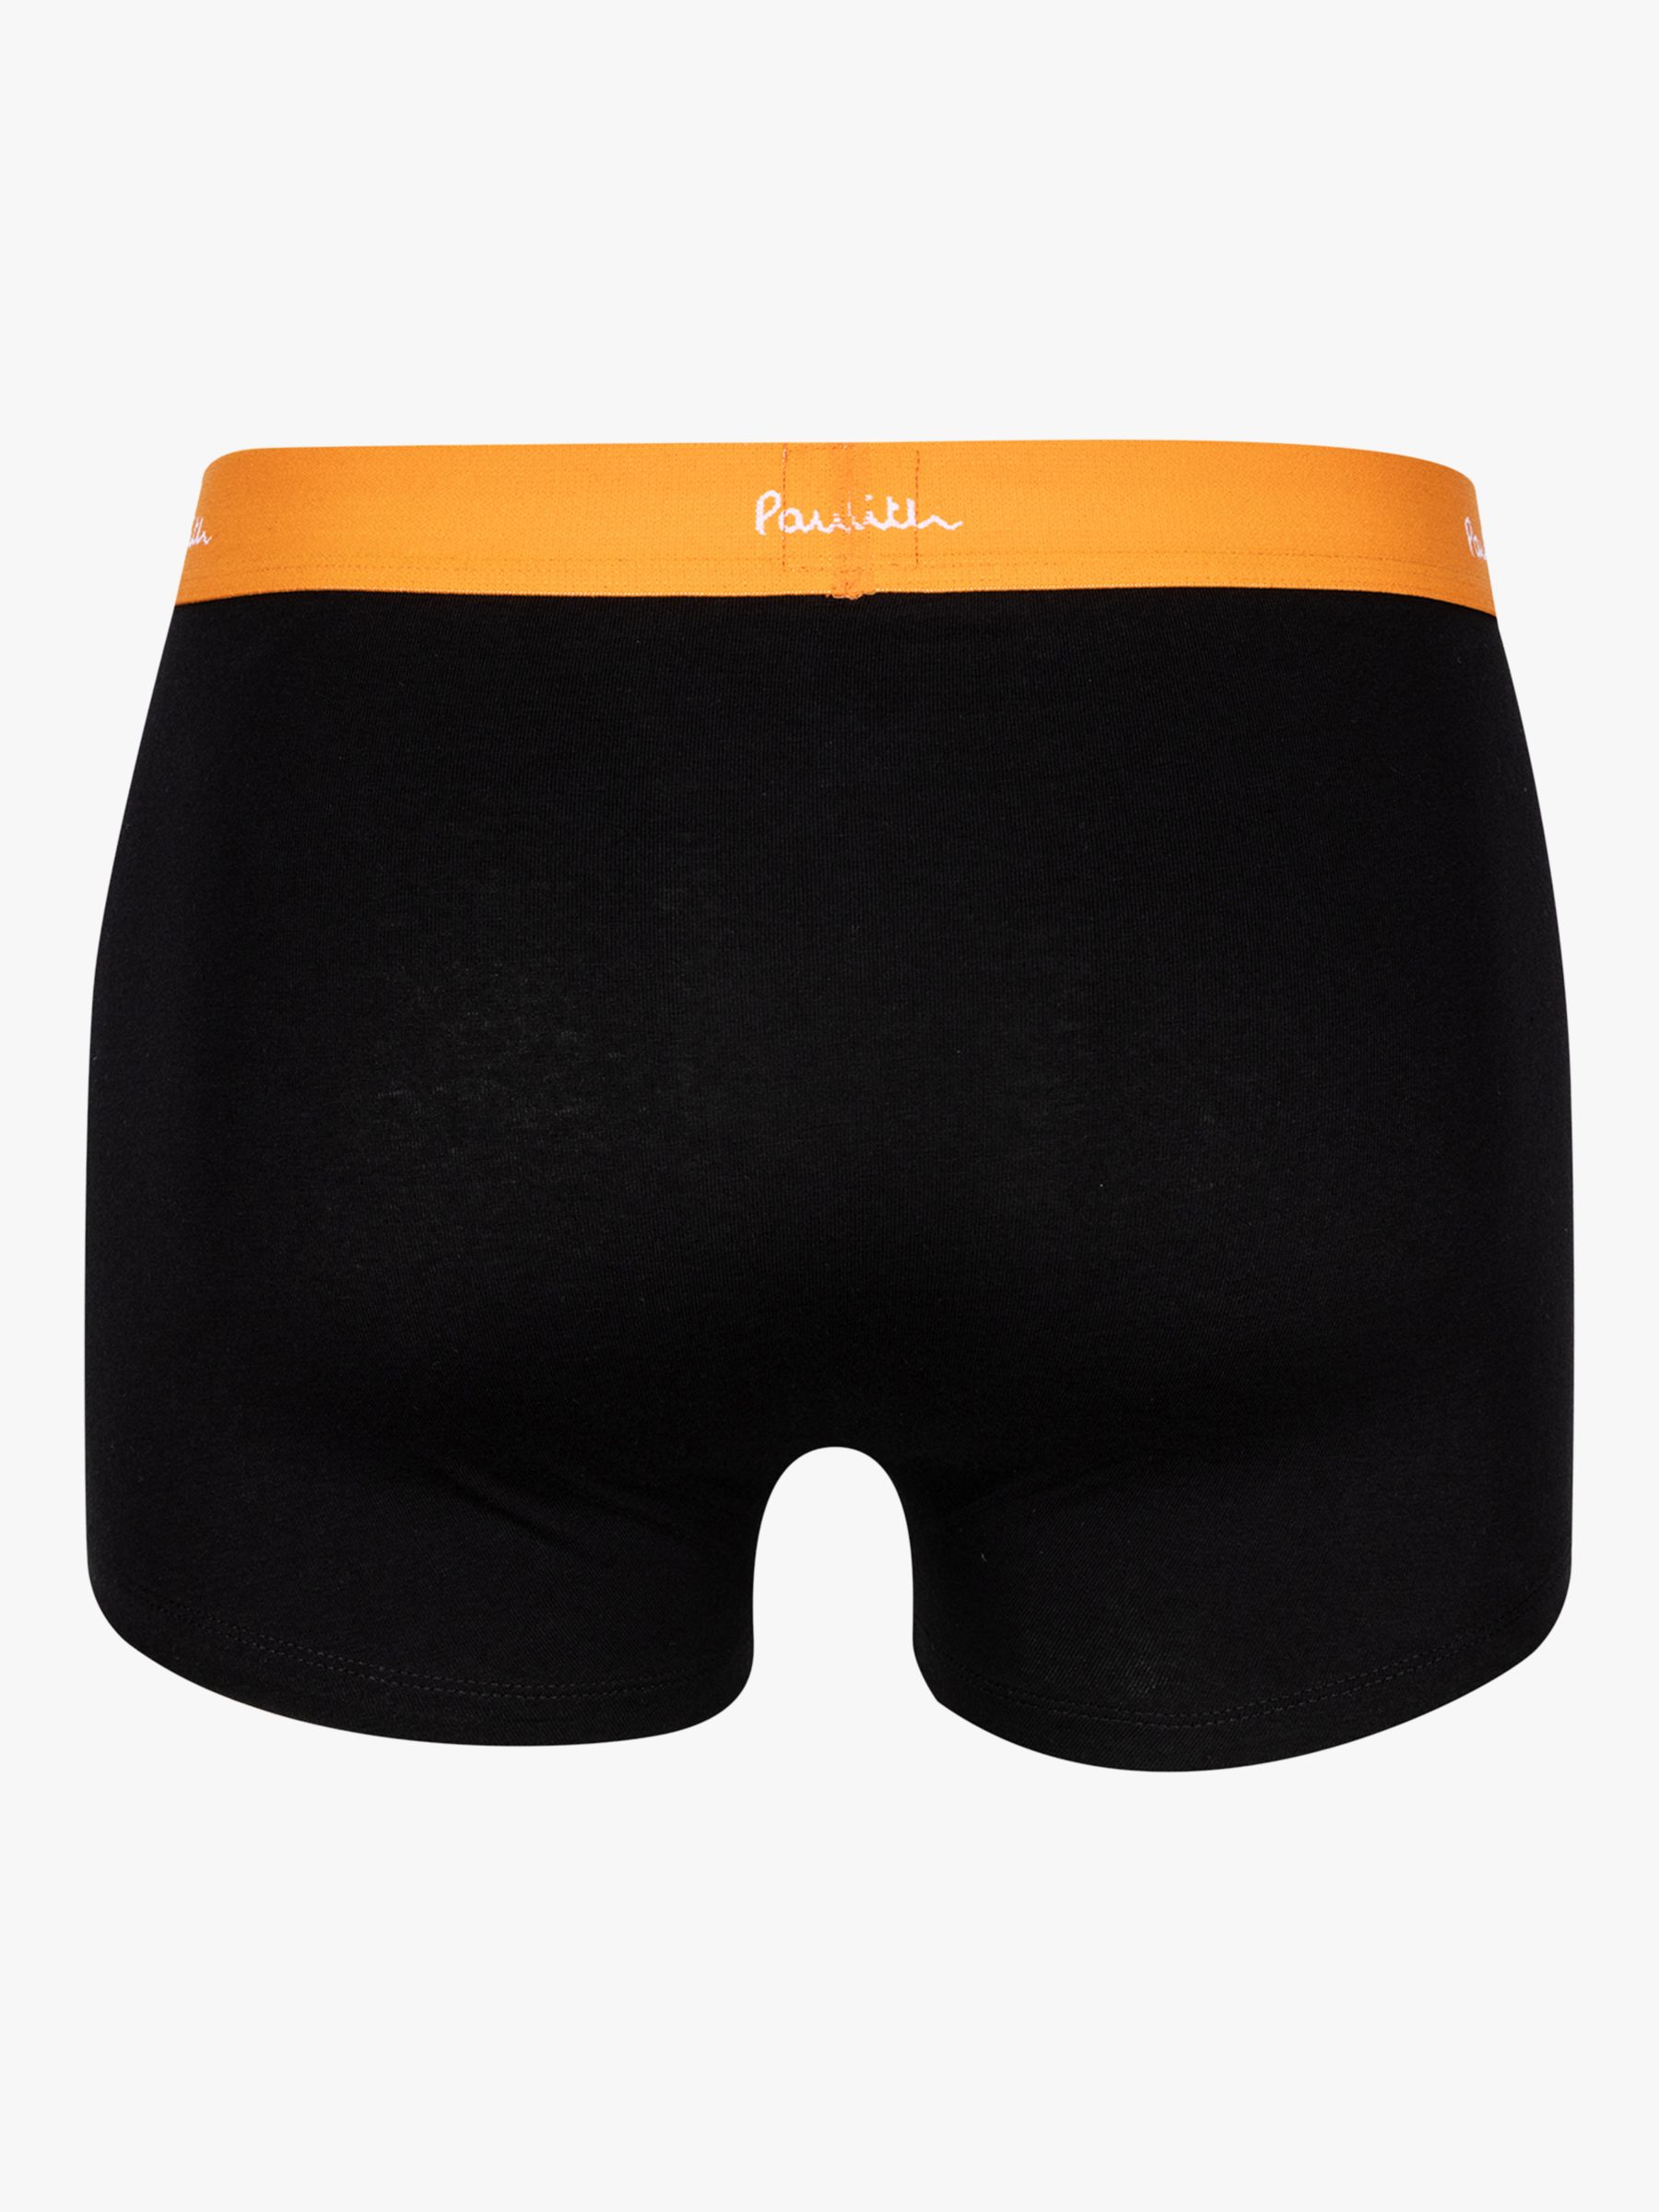 Buy Paul Smith Organic Cotton Blend Boxer Briefs, Pack of 3, Black/Multi Online at johnlewis.com